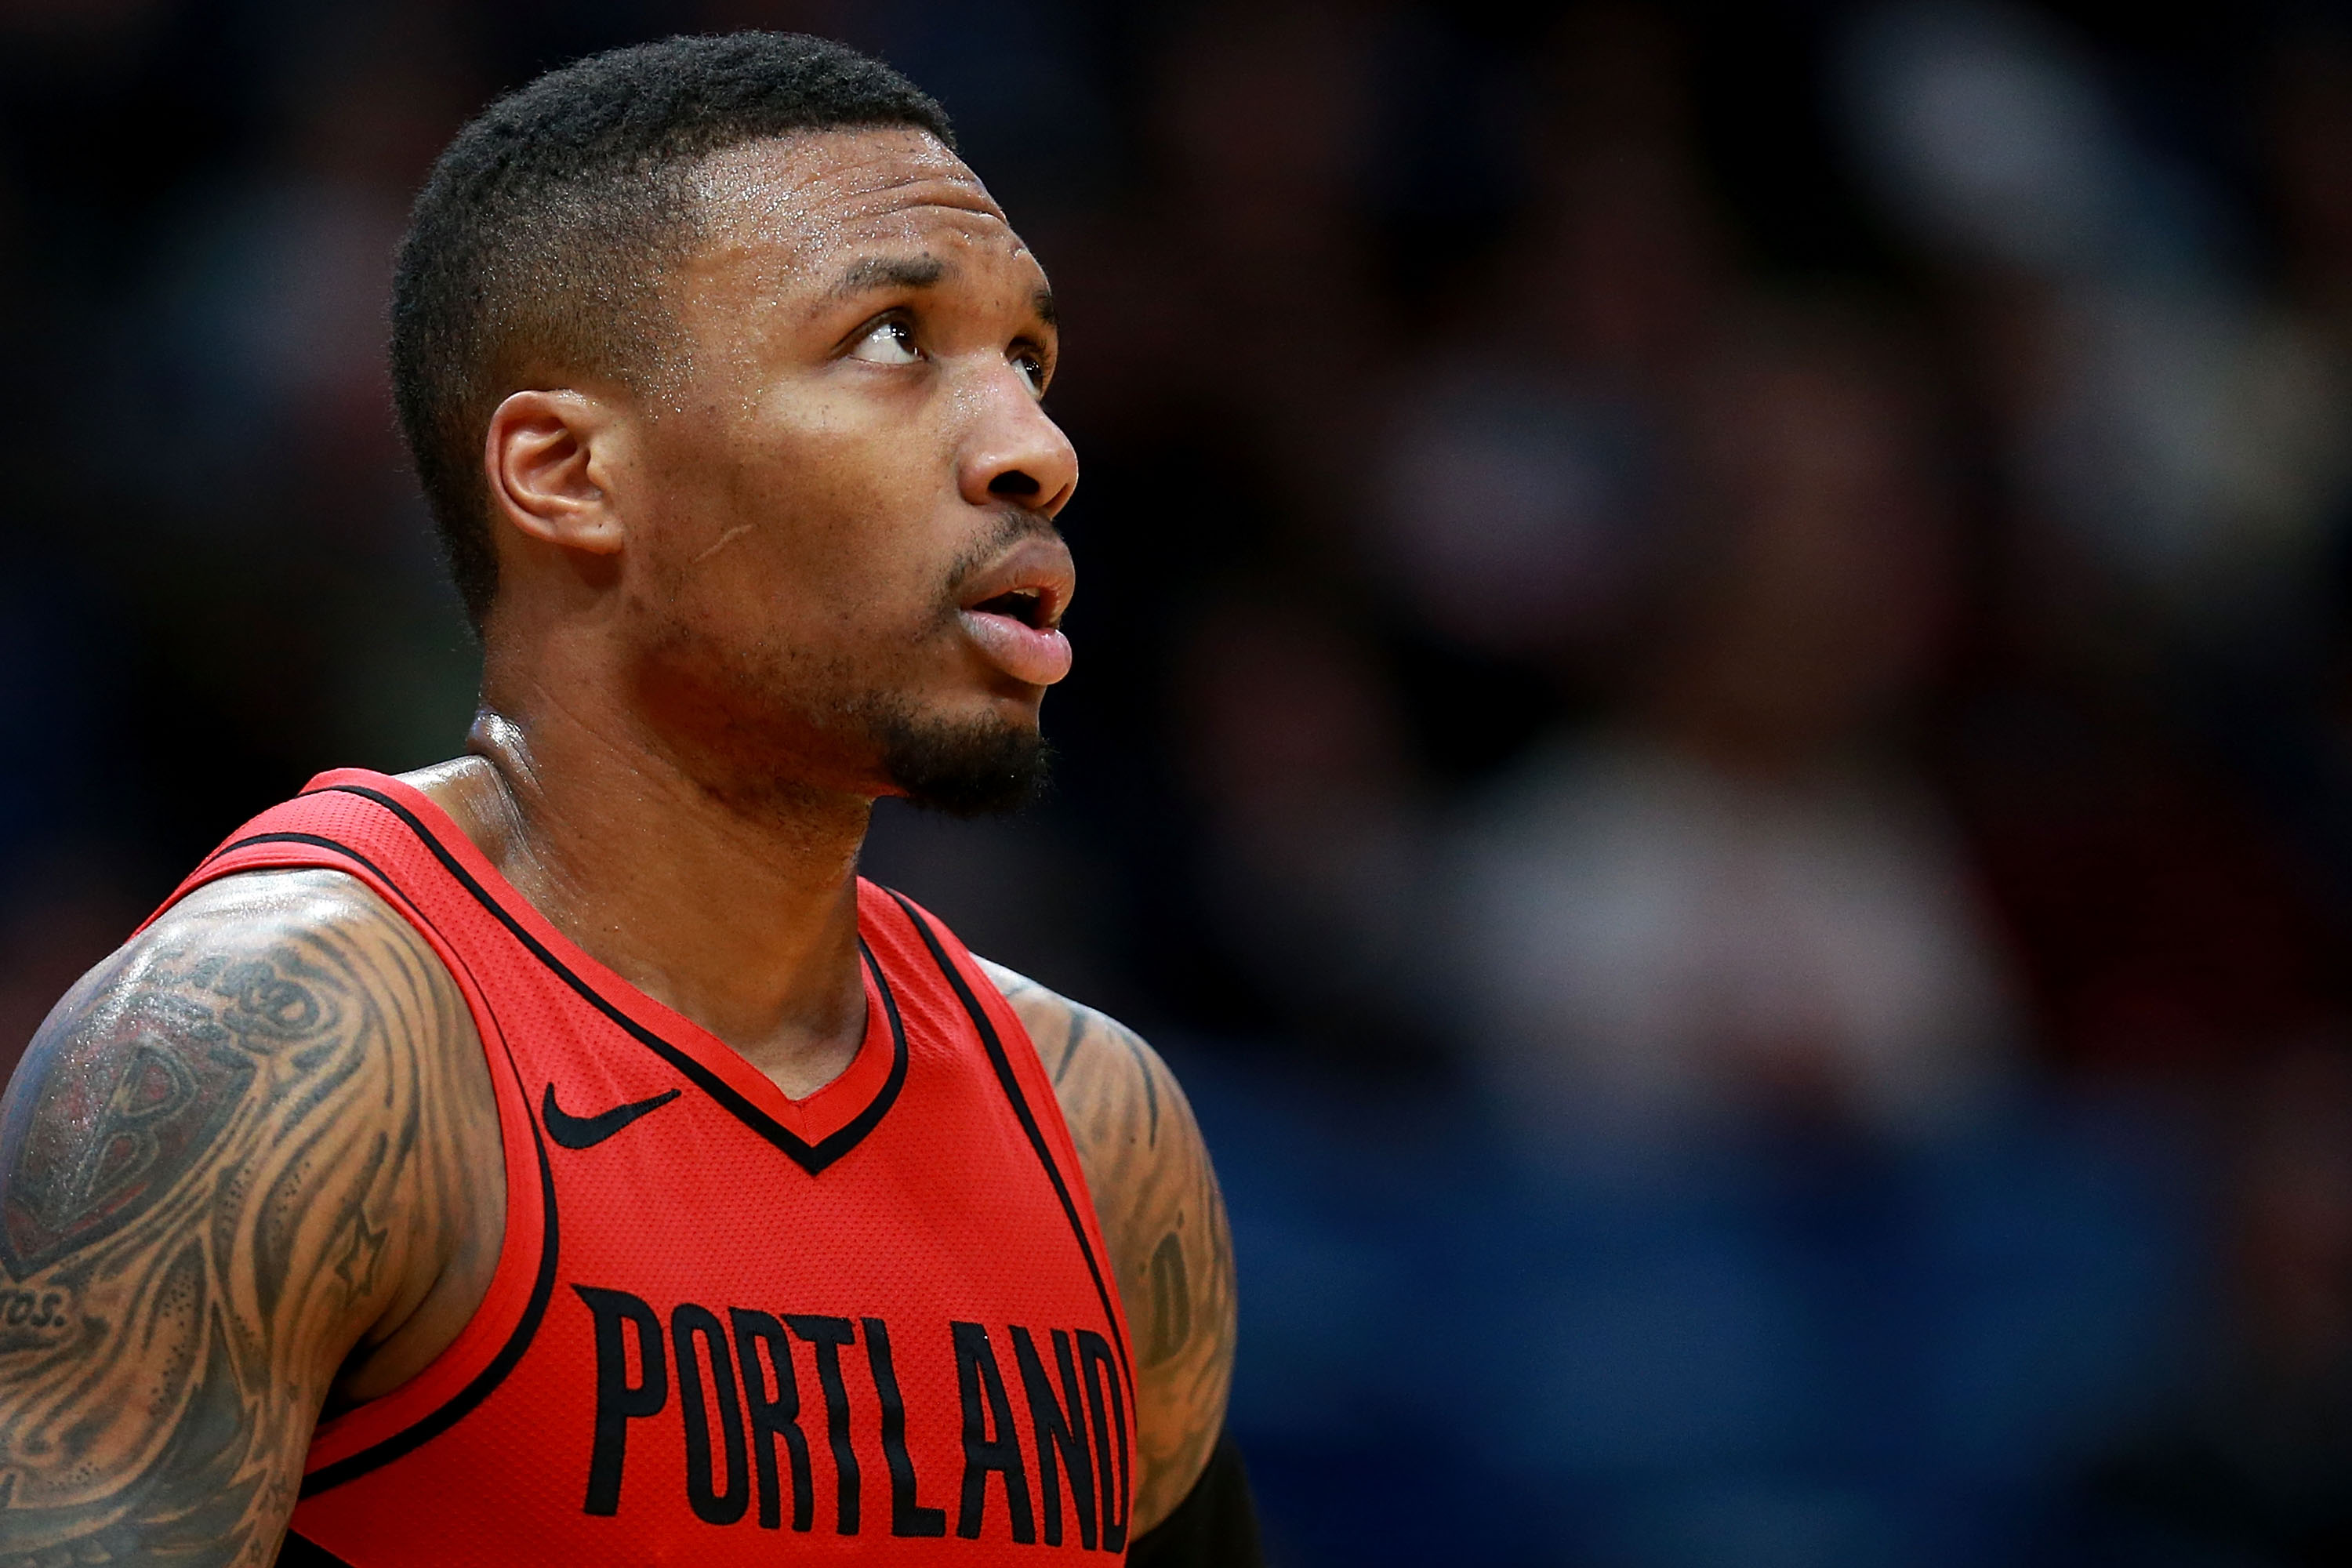 Basketball Forever - Damian Lillard was asked who he'd choose to